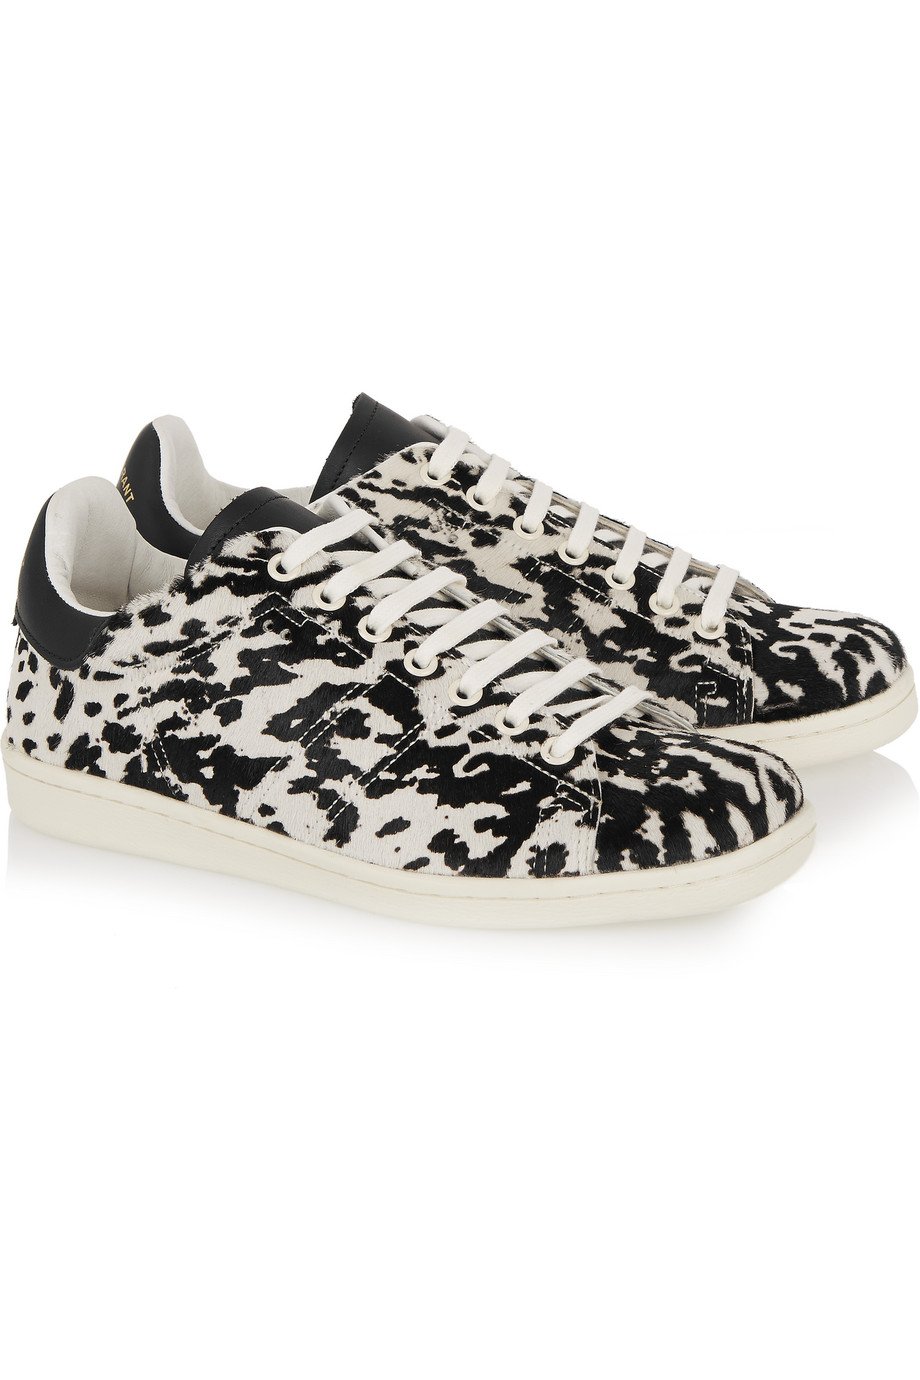 Isabel Bart Sneakers in Black White Print UFO No More